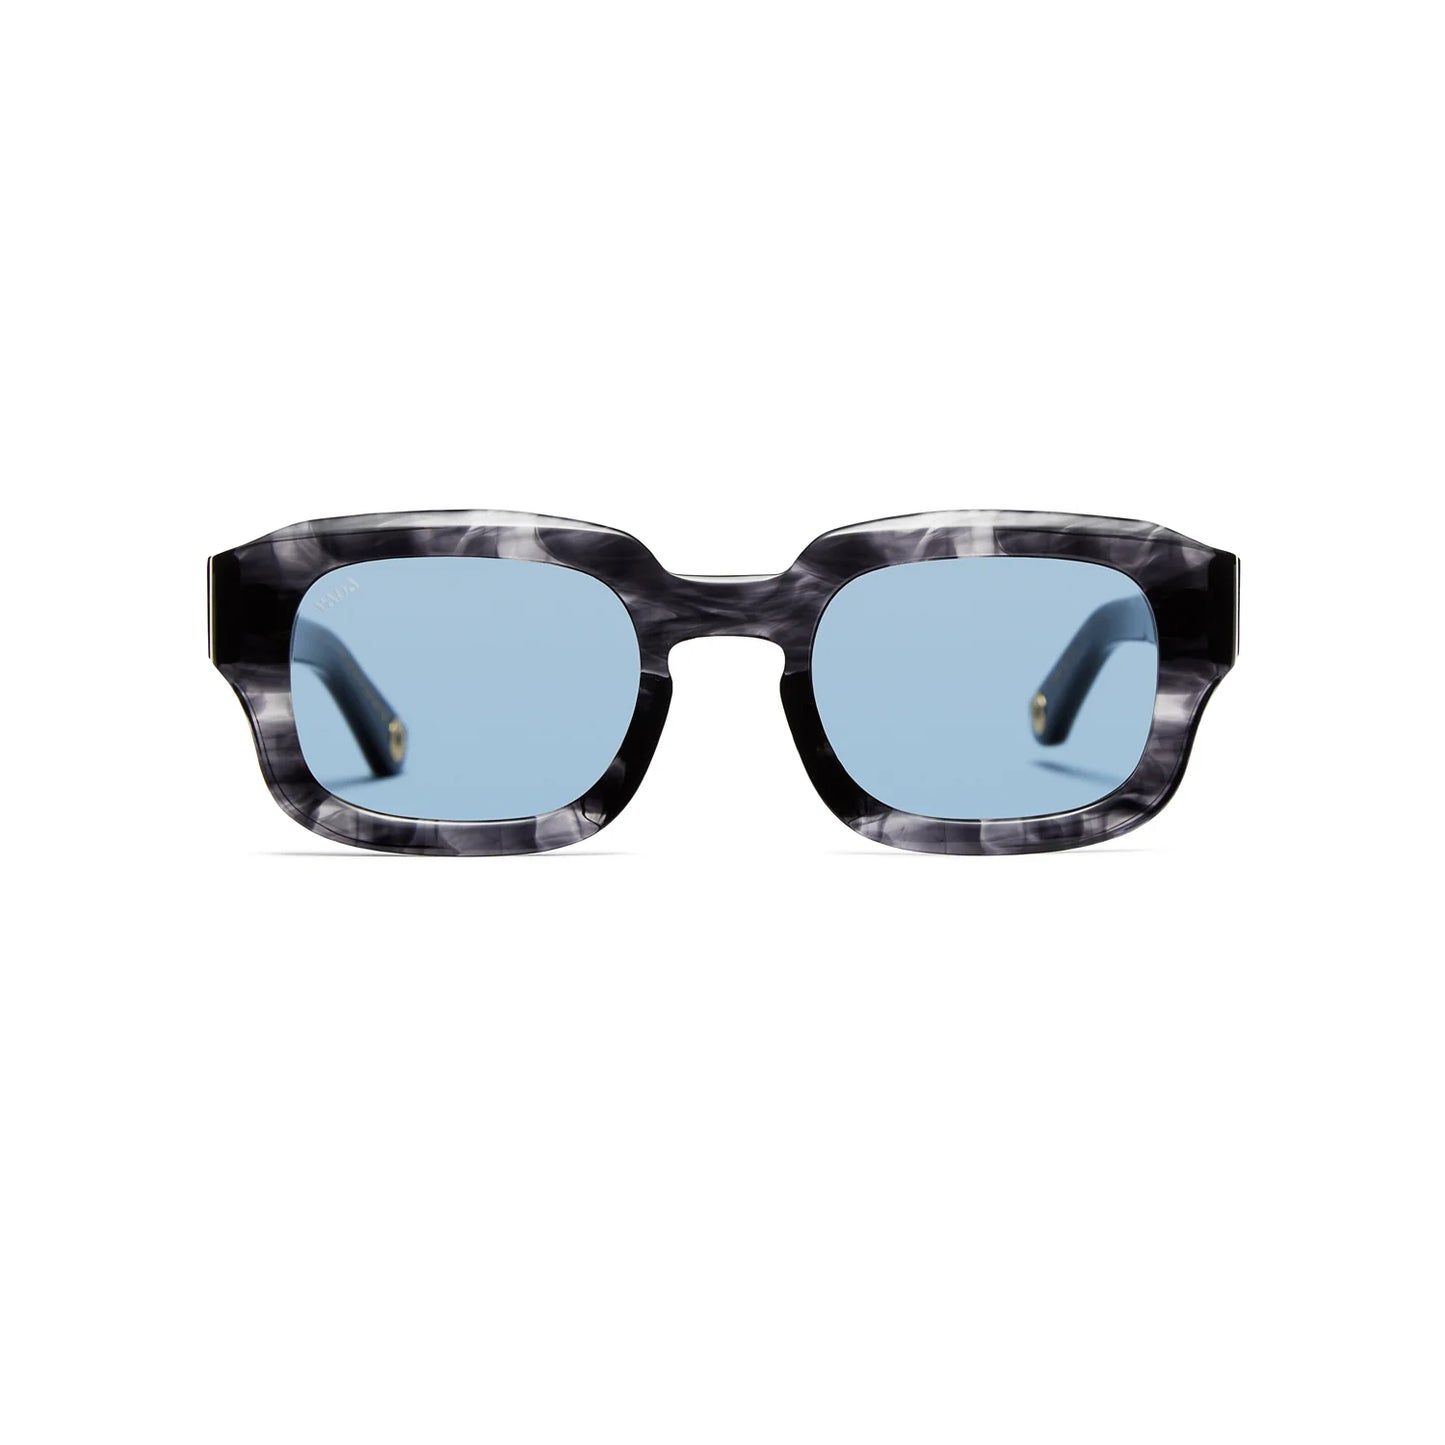 HASKELL Sunglasses by VADA